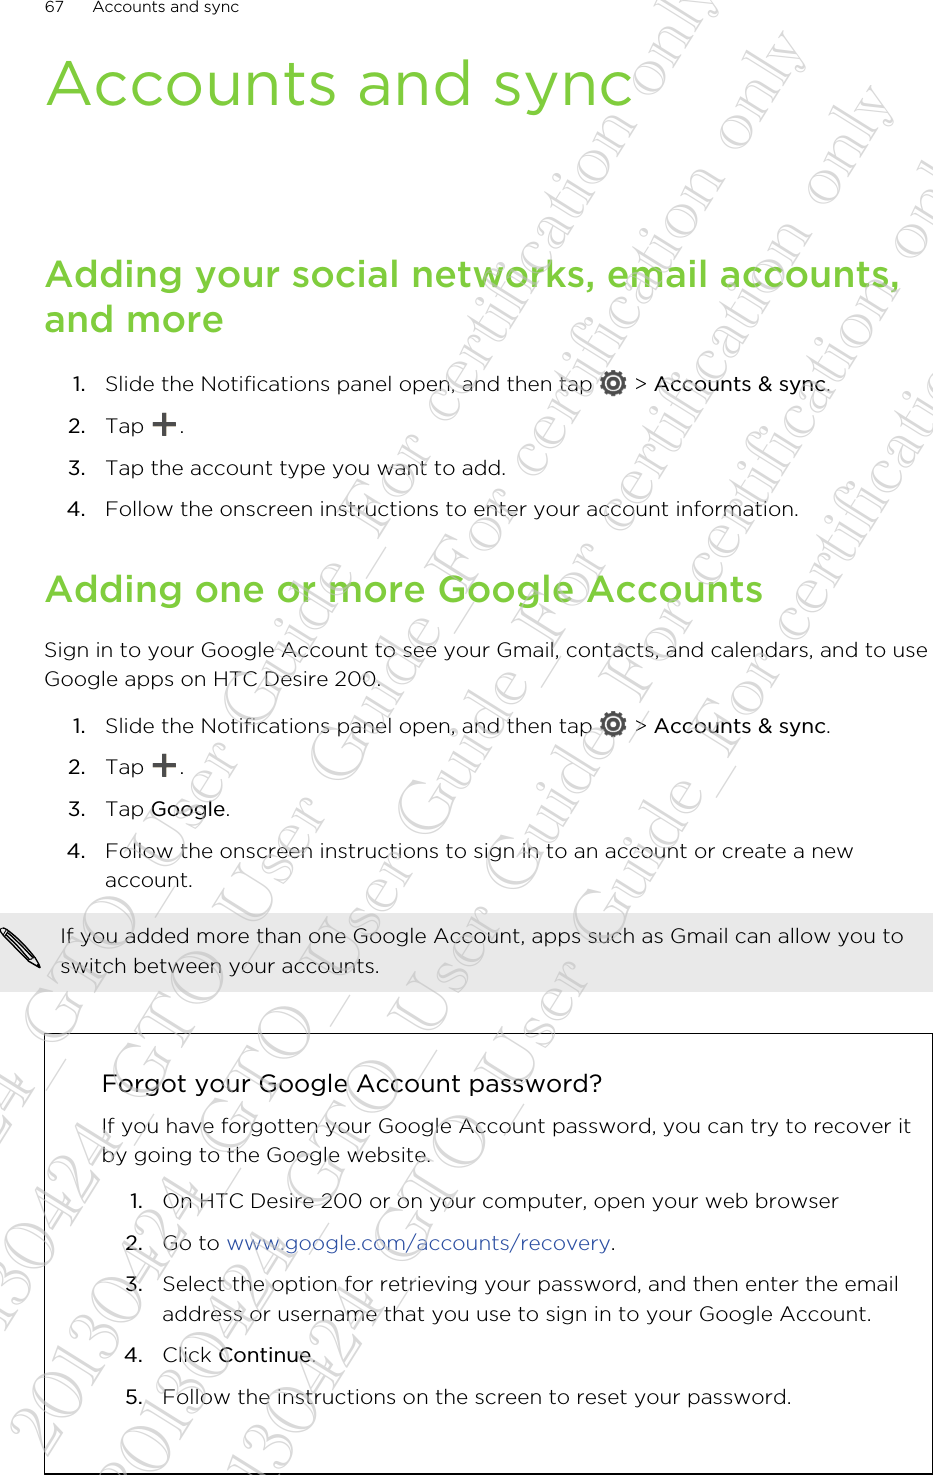 Accounts and syncAdding your social networks, email accounts,and more1. Slide the Notifications panel open, and then tap   &gt; Accounts &amp; sync.2. Tap  .3. Tap the account type you want to add.4. Follow the onscreen instructions to enter your account information.Adding one or more Google AccountsSign in to your Google Account to see your Gmail, contacts, and calendars, and to useGoogle apps on HTC Desire 200.1. Slide the Notifications panel open, and then tap   &gt; Accounts &amp; sync.2. Tap  .3. Tap Google.4. Follow the onscreen instructions to sign in to an account or create a newaccount.If you added more than one Google Account, apps such as Gmail can allow you toswitch between your accounts.Forgot your Google Account password?If you have forgotten your Google Account password, you can try to recover itby going to the Google website.1. On HTC Desire 200 or on your computer, open your web browser2. Go to www.google.com/accounts/recovery.3. Select the option for retrieving your password, and then enter the emailaddress or username that you use to sign in to your Google Account.4. Click Continue.5. Follow the instructions on the screen to reset your password.67 Accounts and sync20130424_GTO_User Guide_For certification only 20130424_GTO_User Guide_For certification only 20130424_GTO_User Guide_For certification only 20130424_GTO_User Guide_For certification only 20130424_GTO_User Guide_For certification only